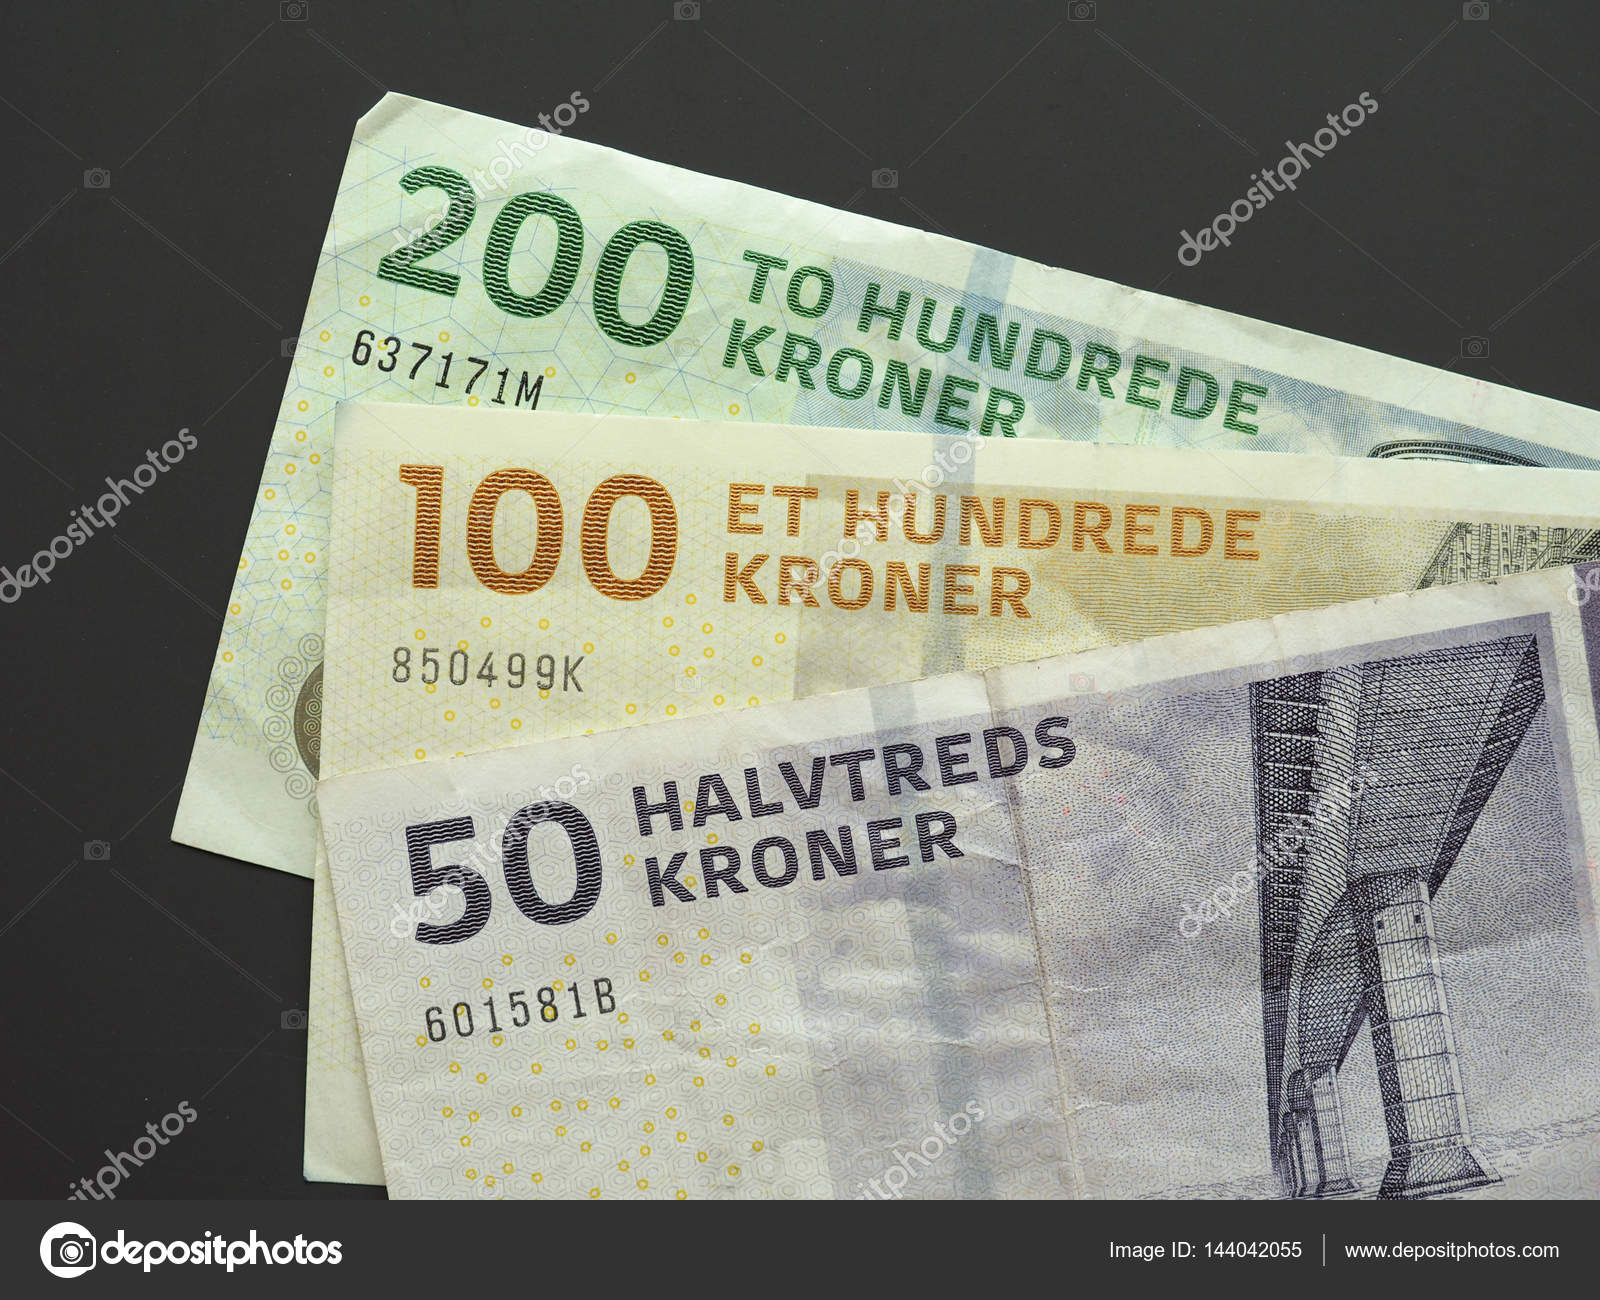 danish krone dkk banknotes currency denmark stock photo by c route66 144042055